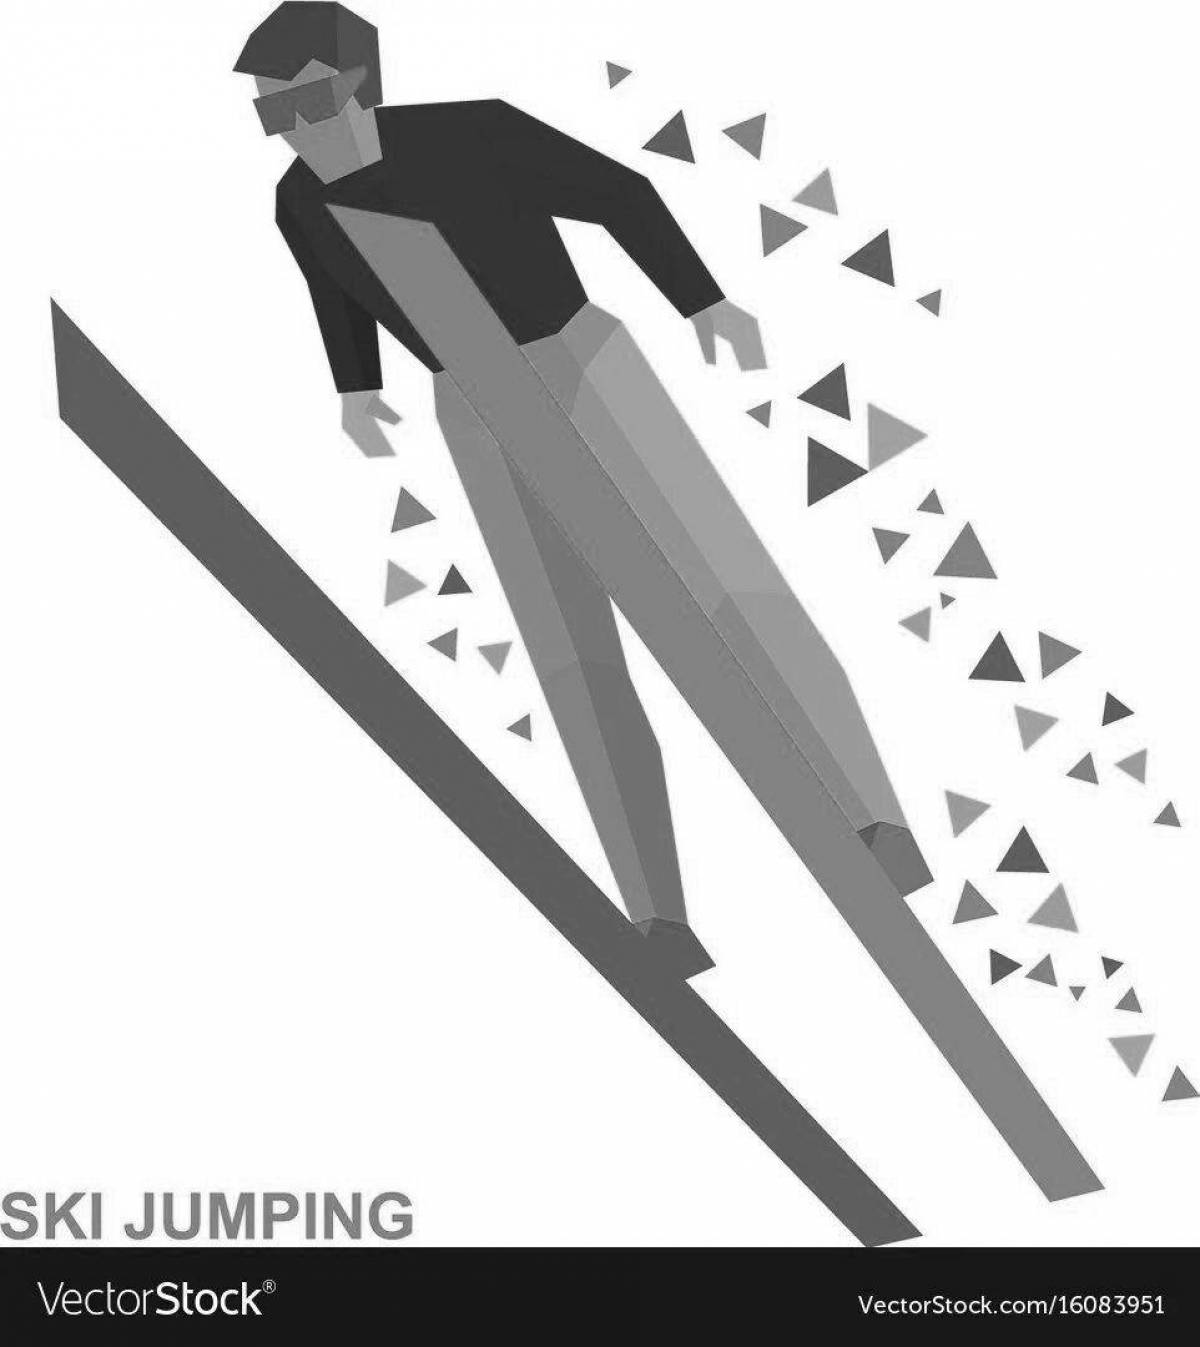 Exciting ski jumping coloring book